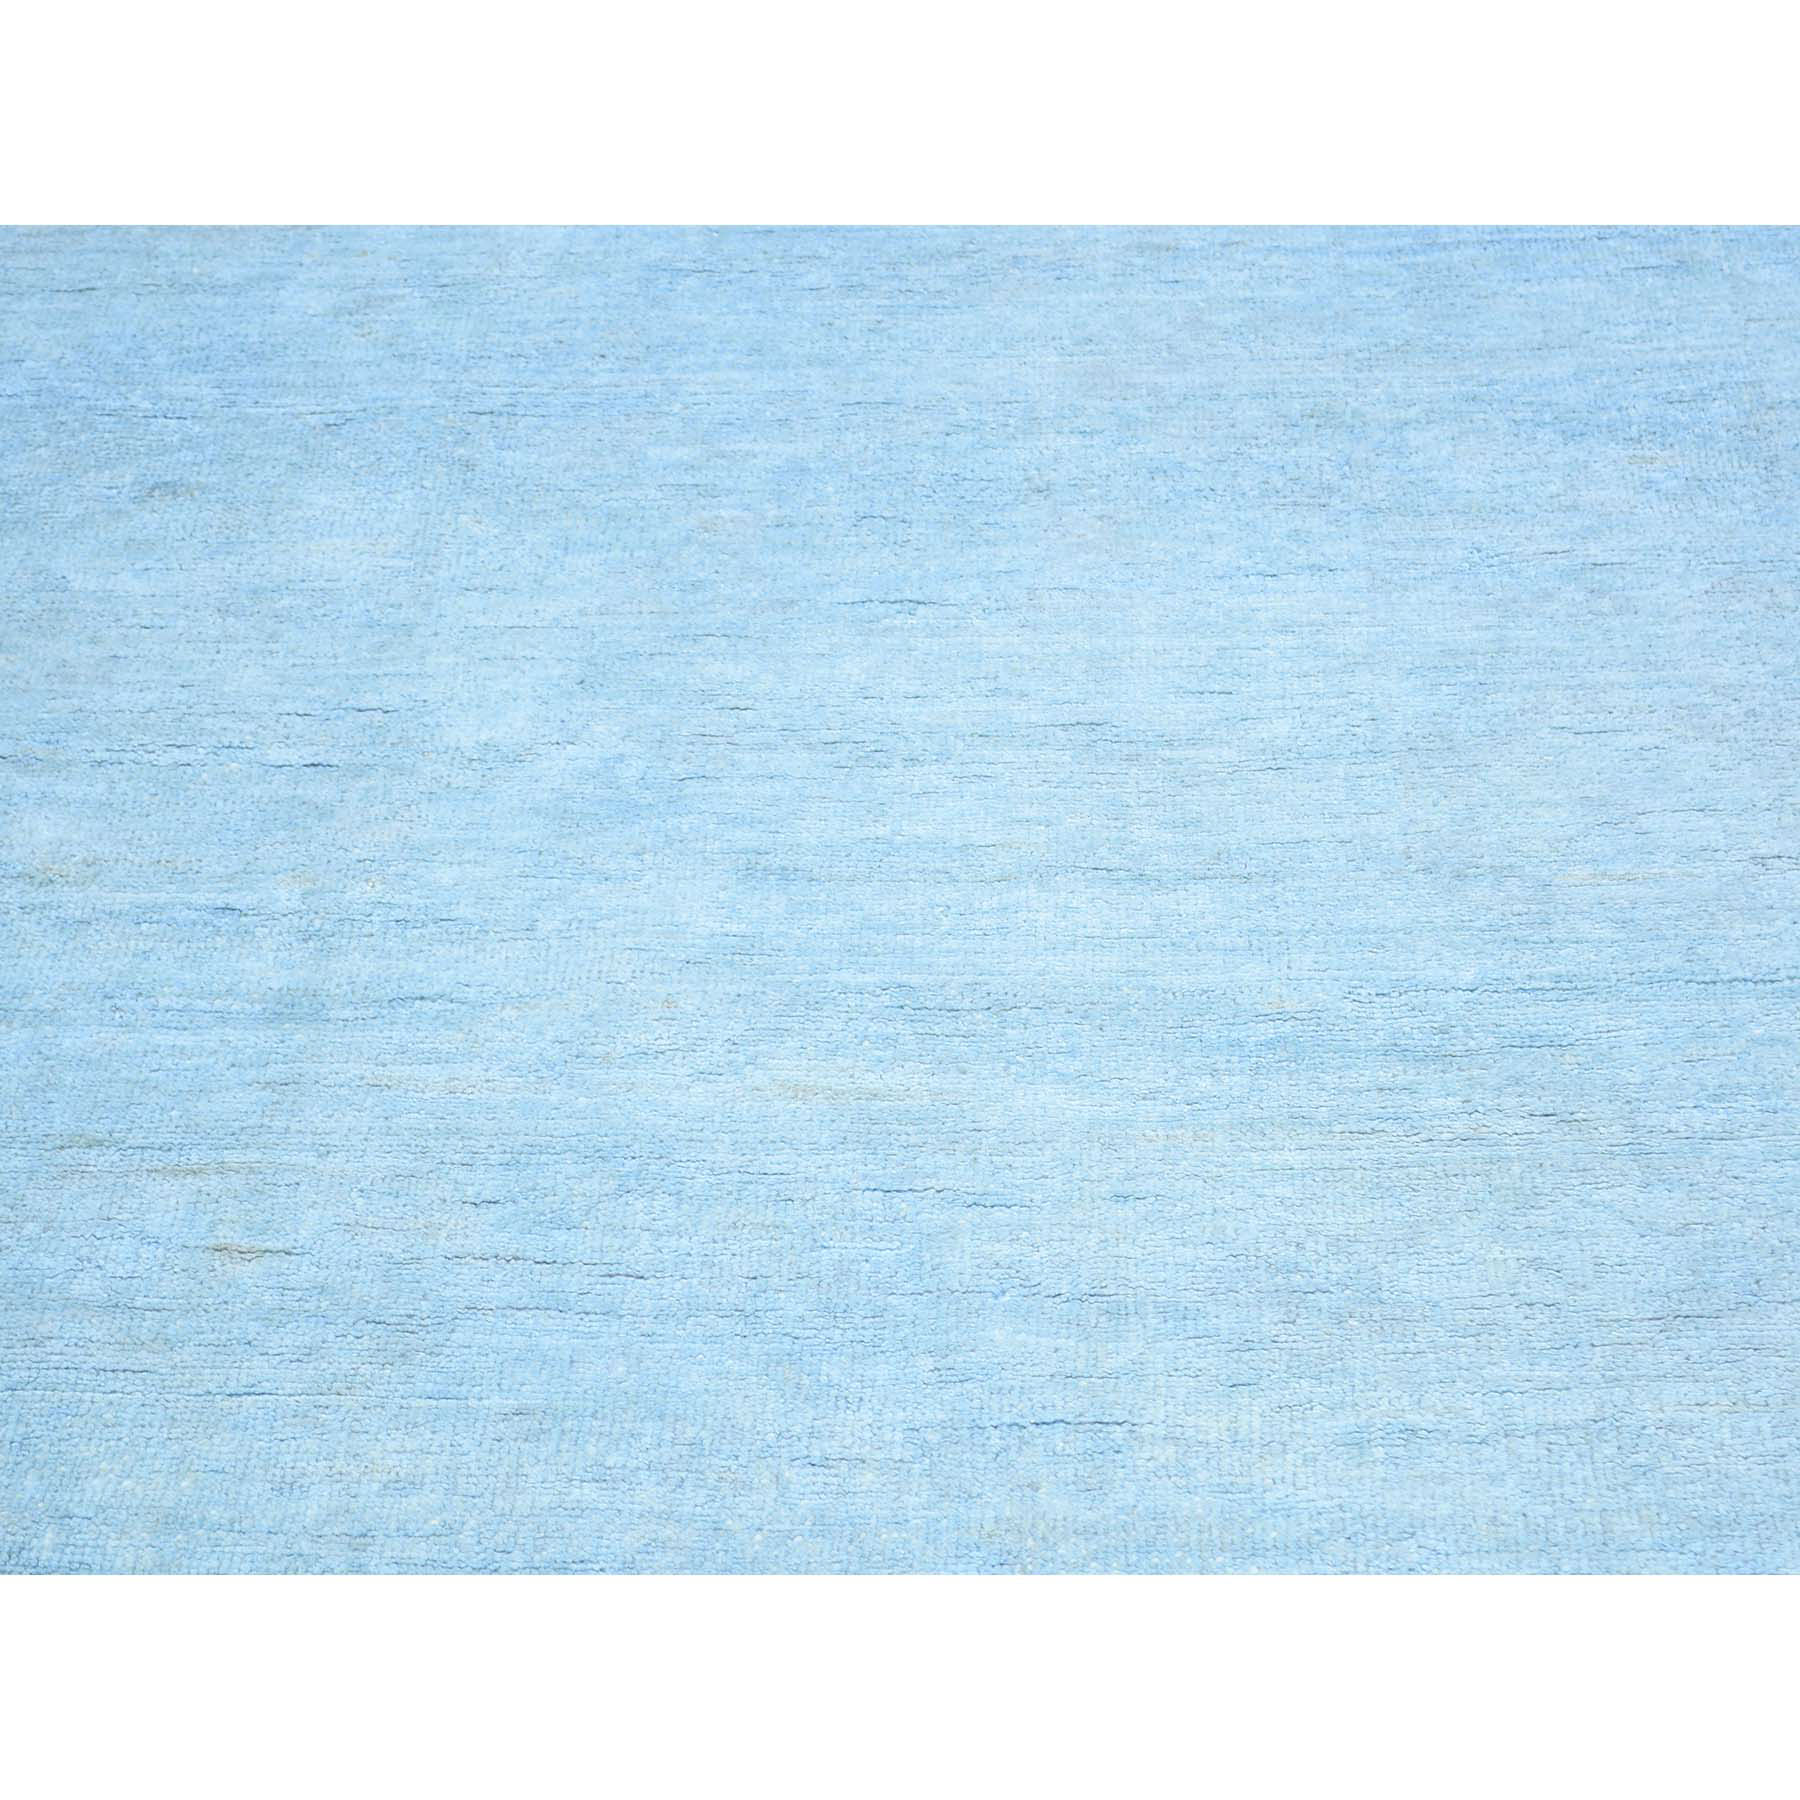 4-x6- Hand Knotted Sky Blue Cast Peshawar Overdyed Pure Wool Oriental Rug 